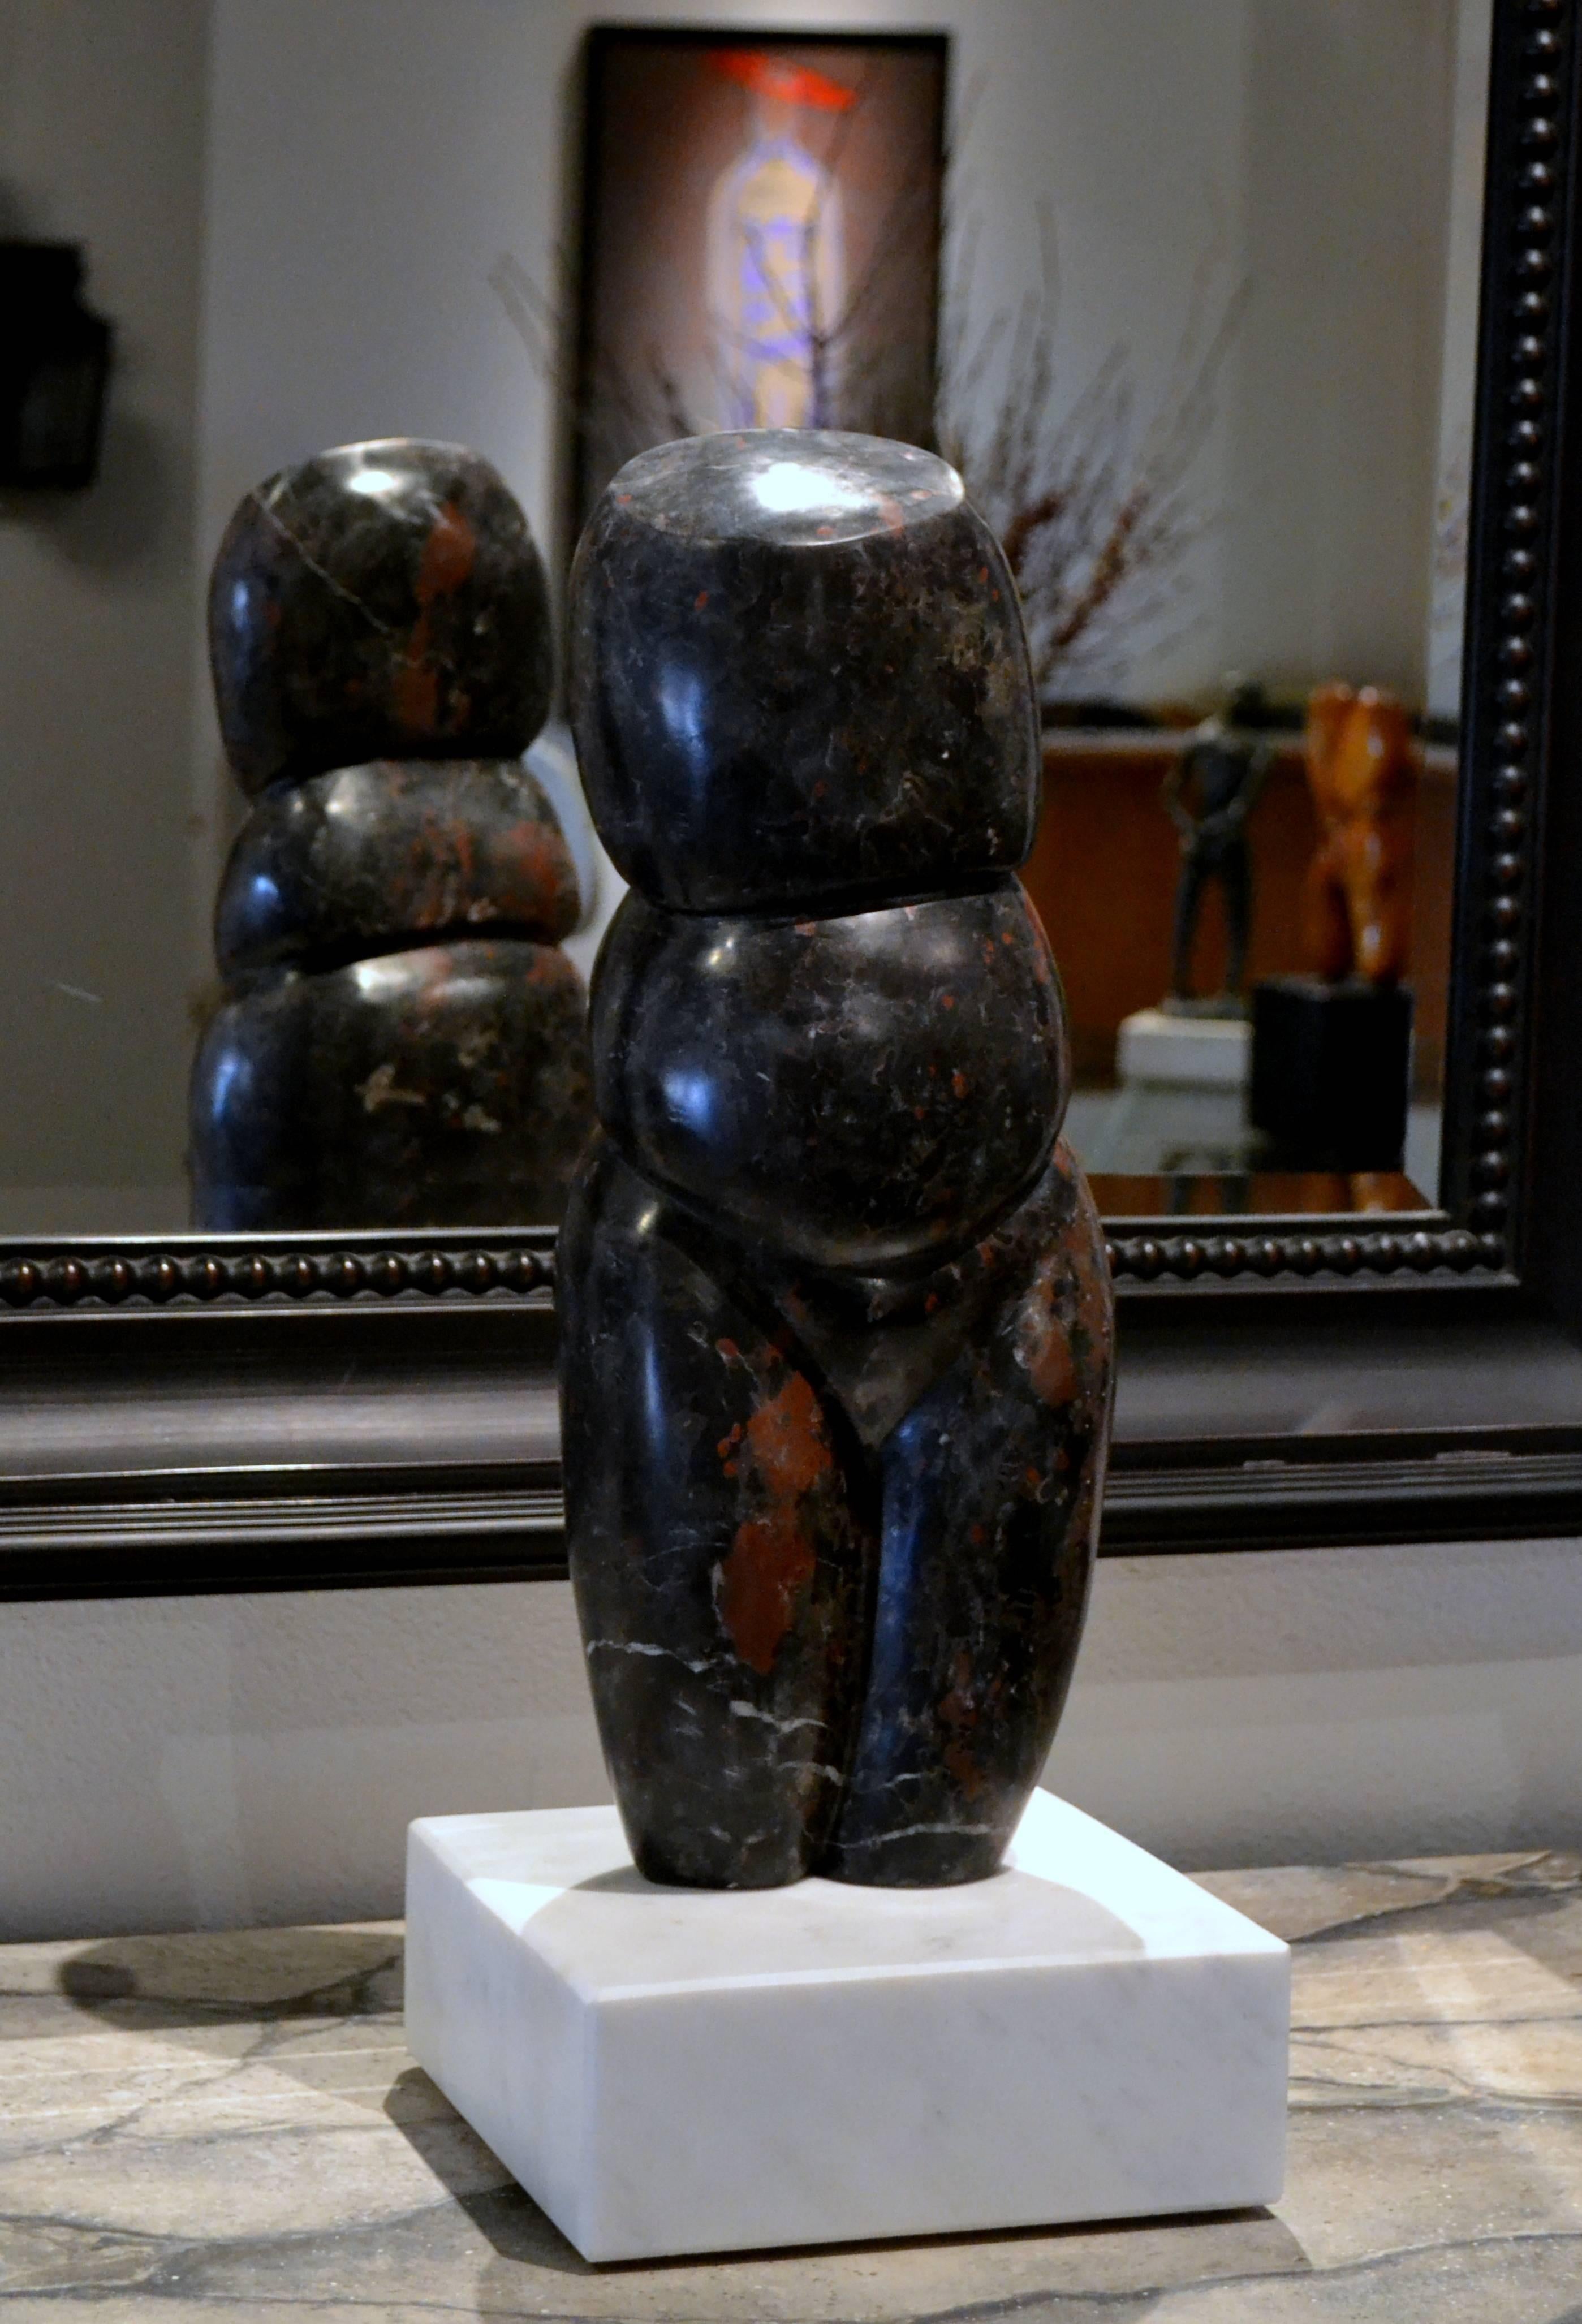 This elegant and exceptionally carved abstract sculpture of a female torso by listed artist Scott Donadio (b. 1961) is titled MY GEISHA. It is carved from a beautiful black California marble with deep red veining. The sculpture is mounted on a white